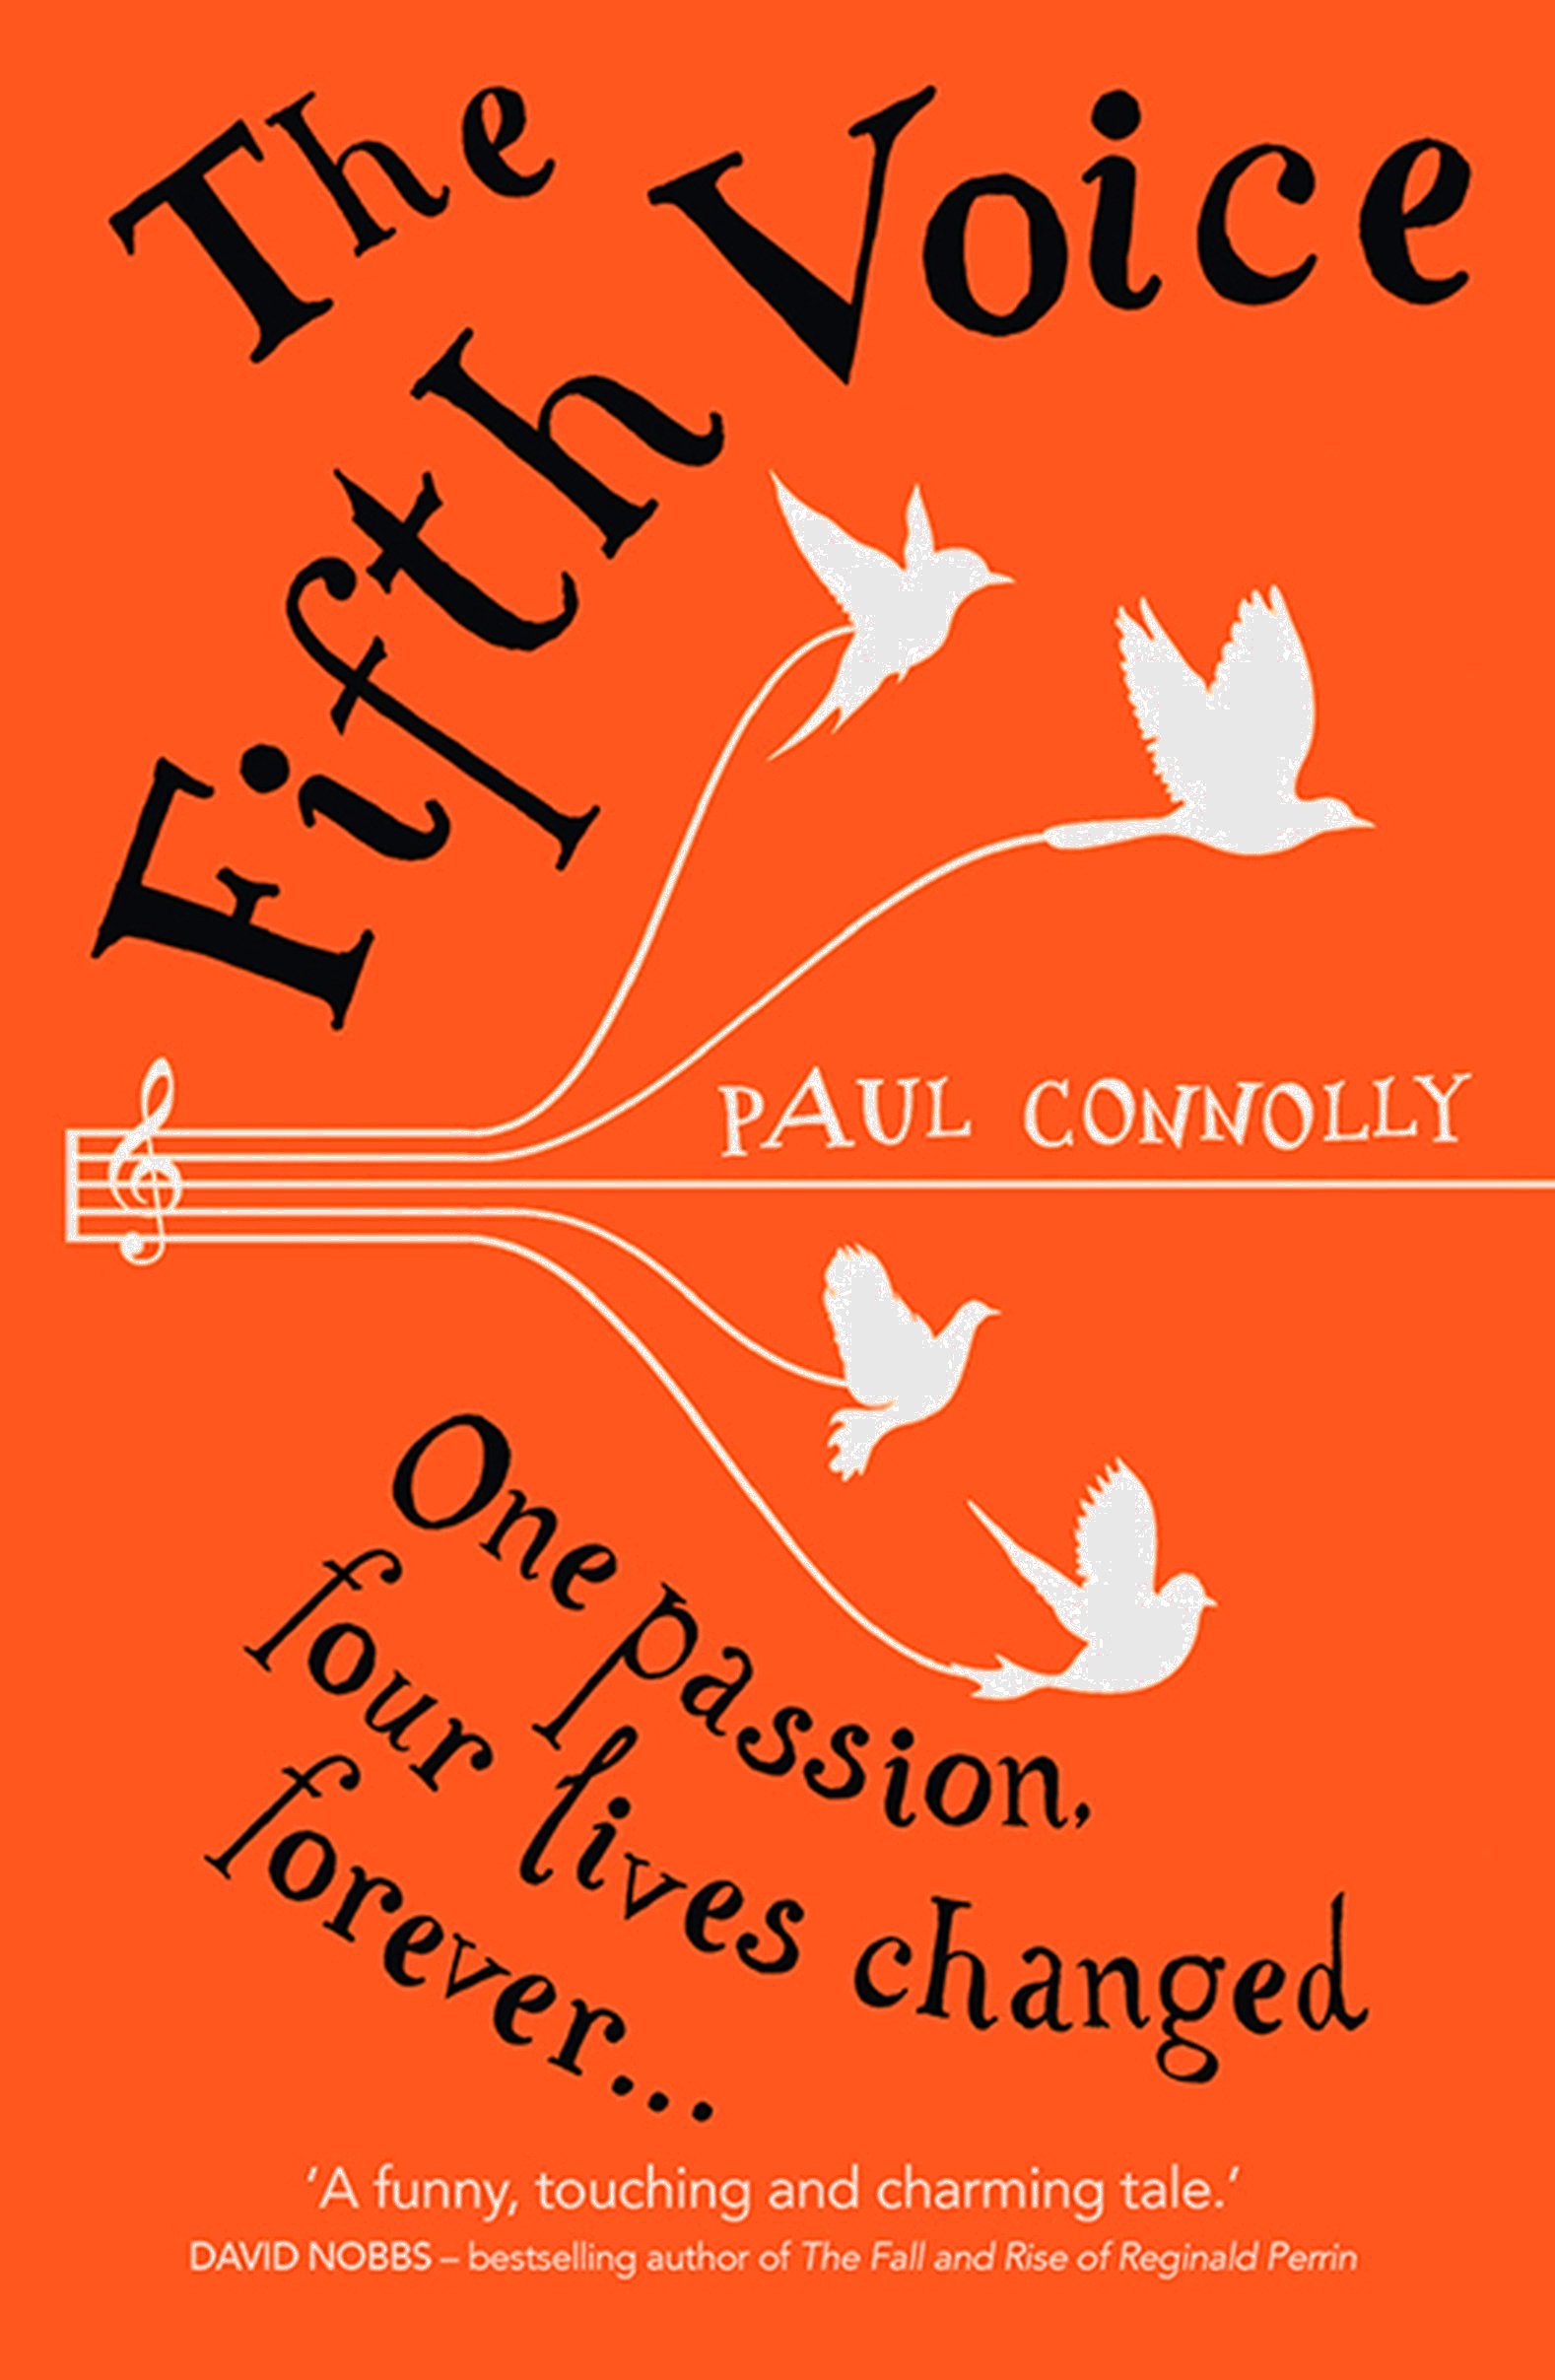 Cover Of The Fifth Voice By Paul Connolly